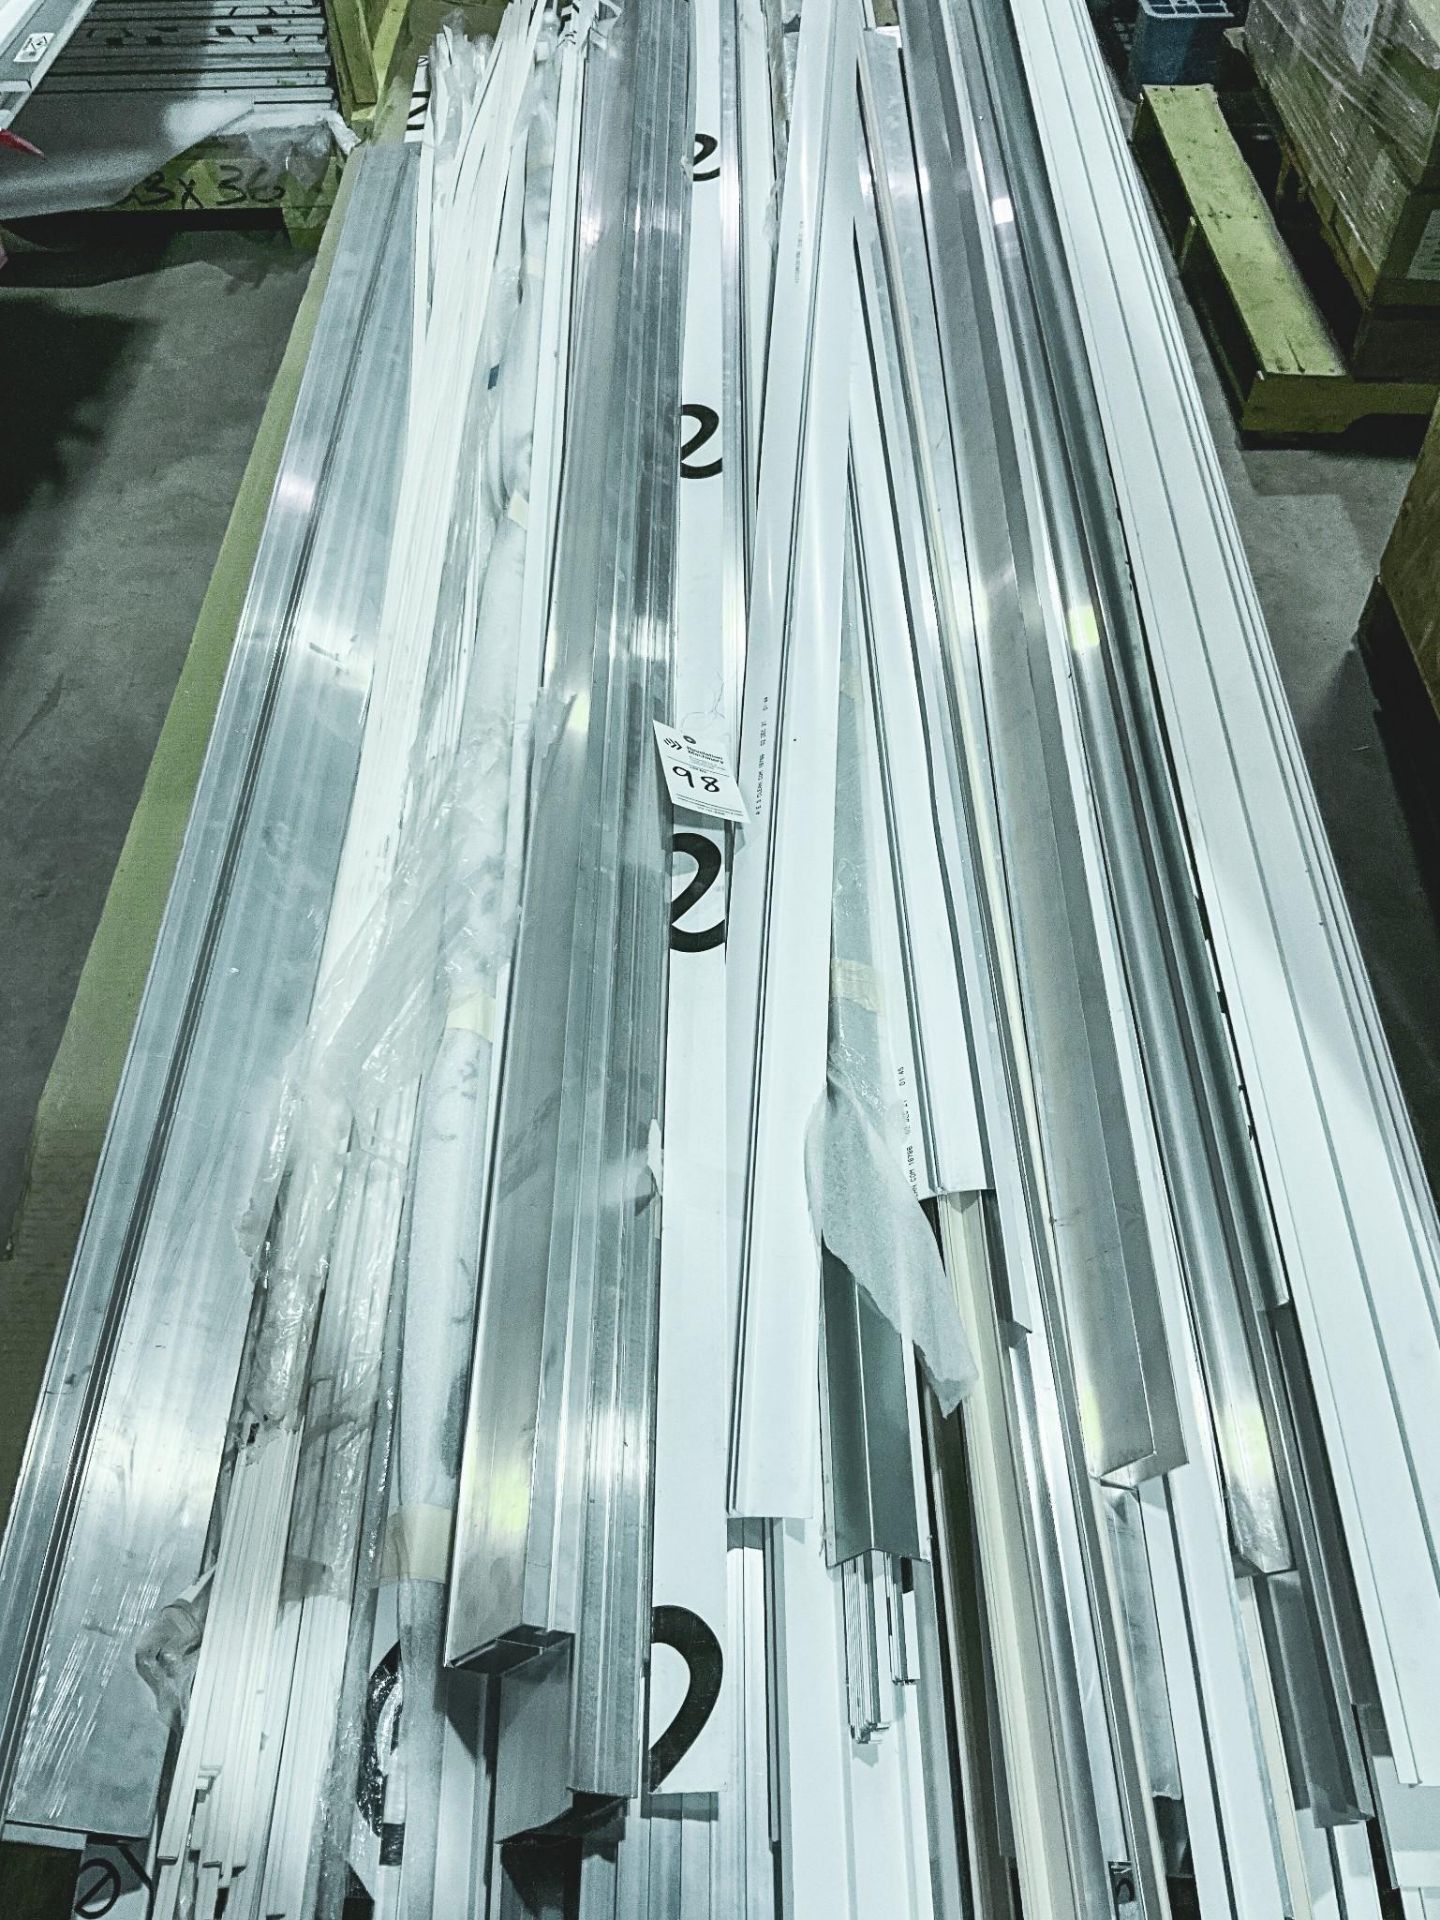 WEATHER STRIPS, BEAMS FOR PORTABLE BUILDING 132" WIDTH